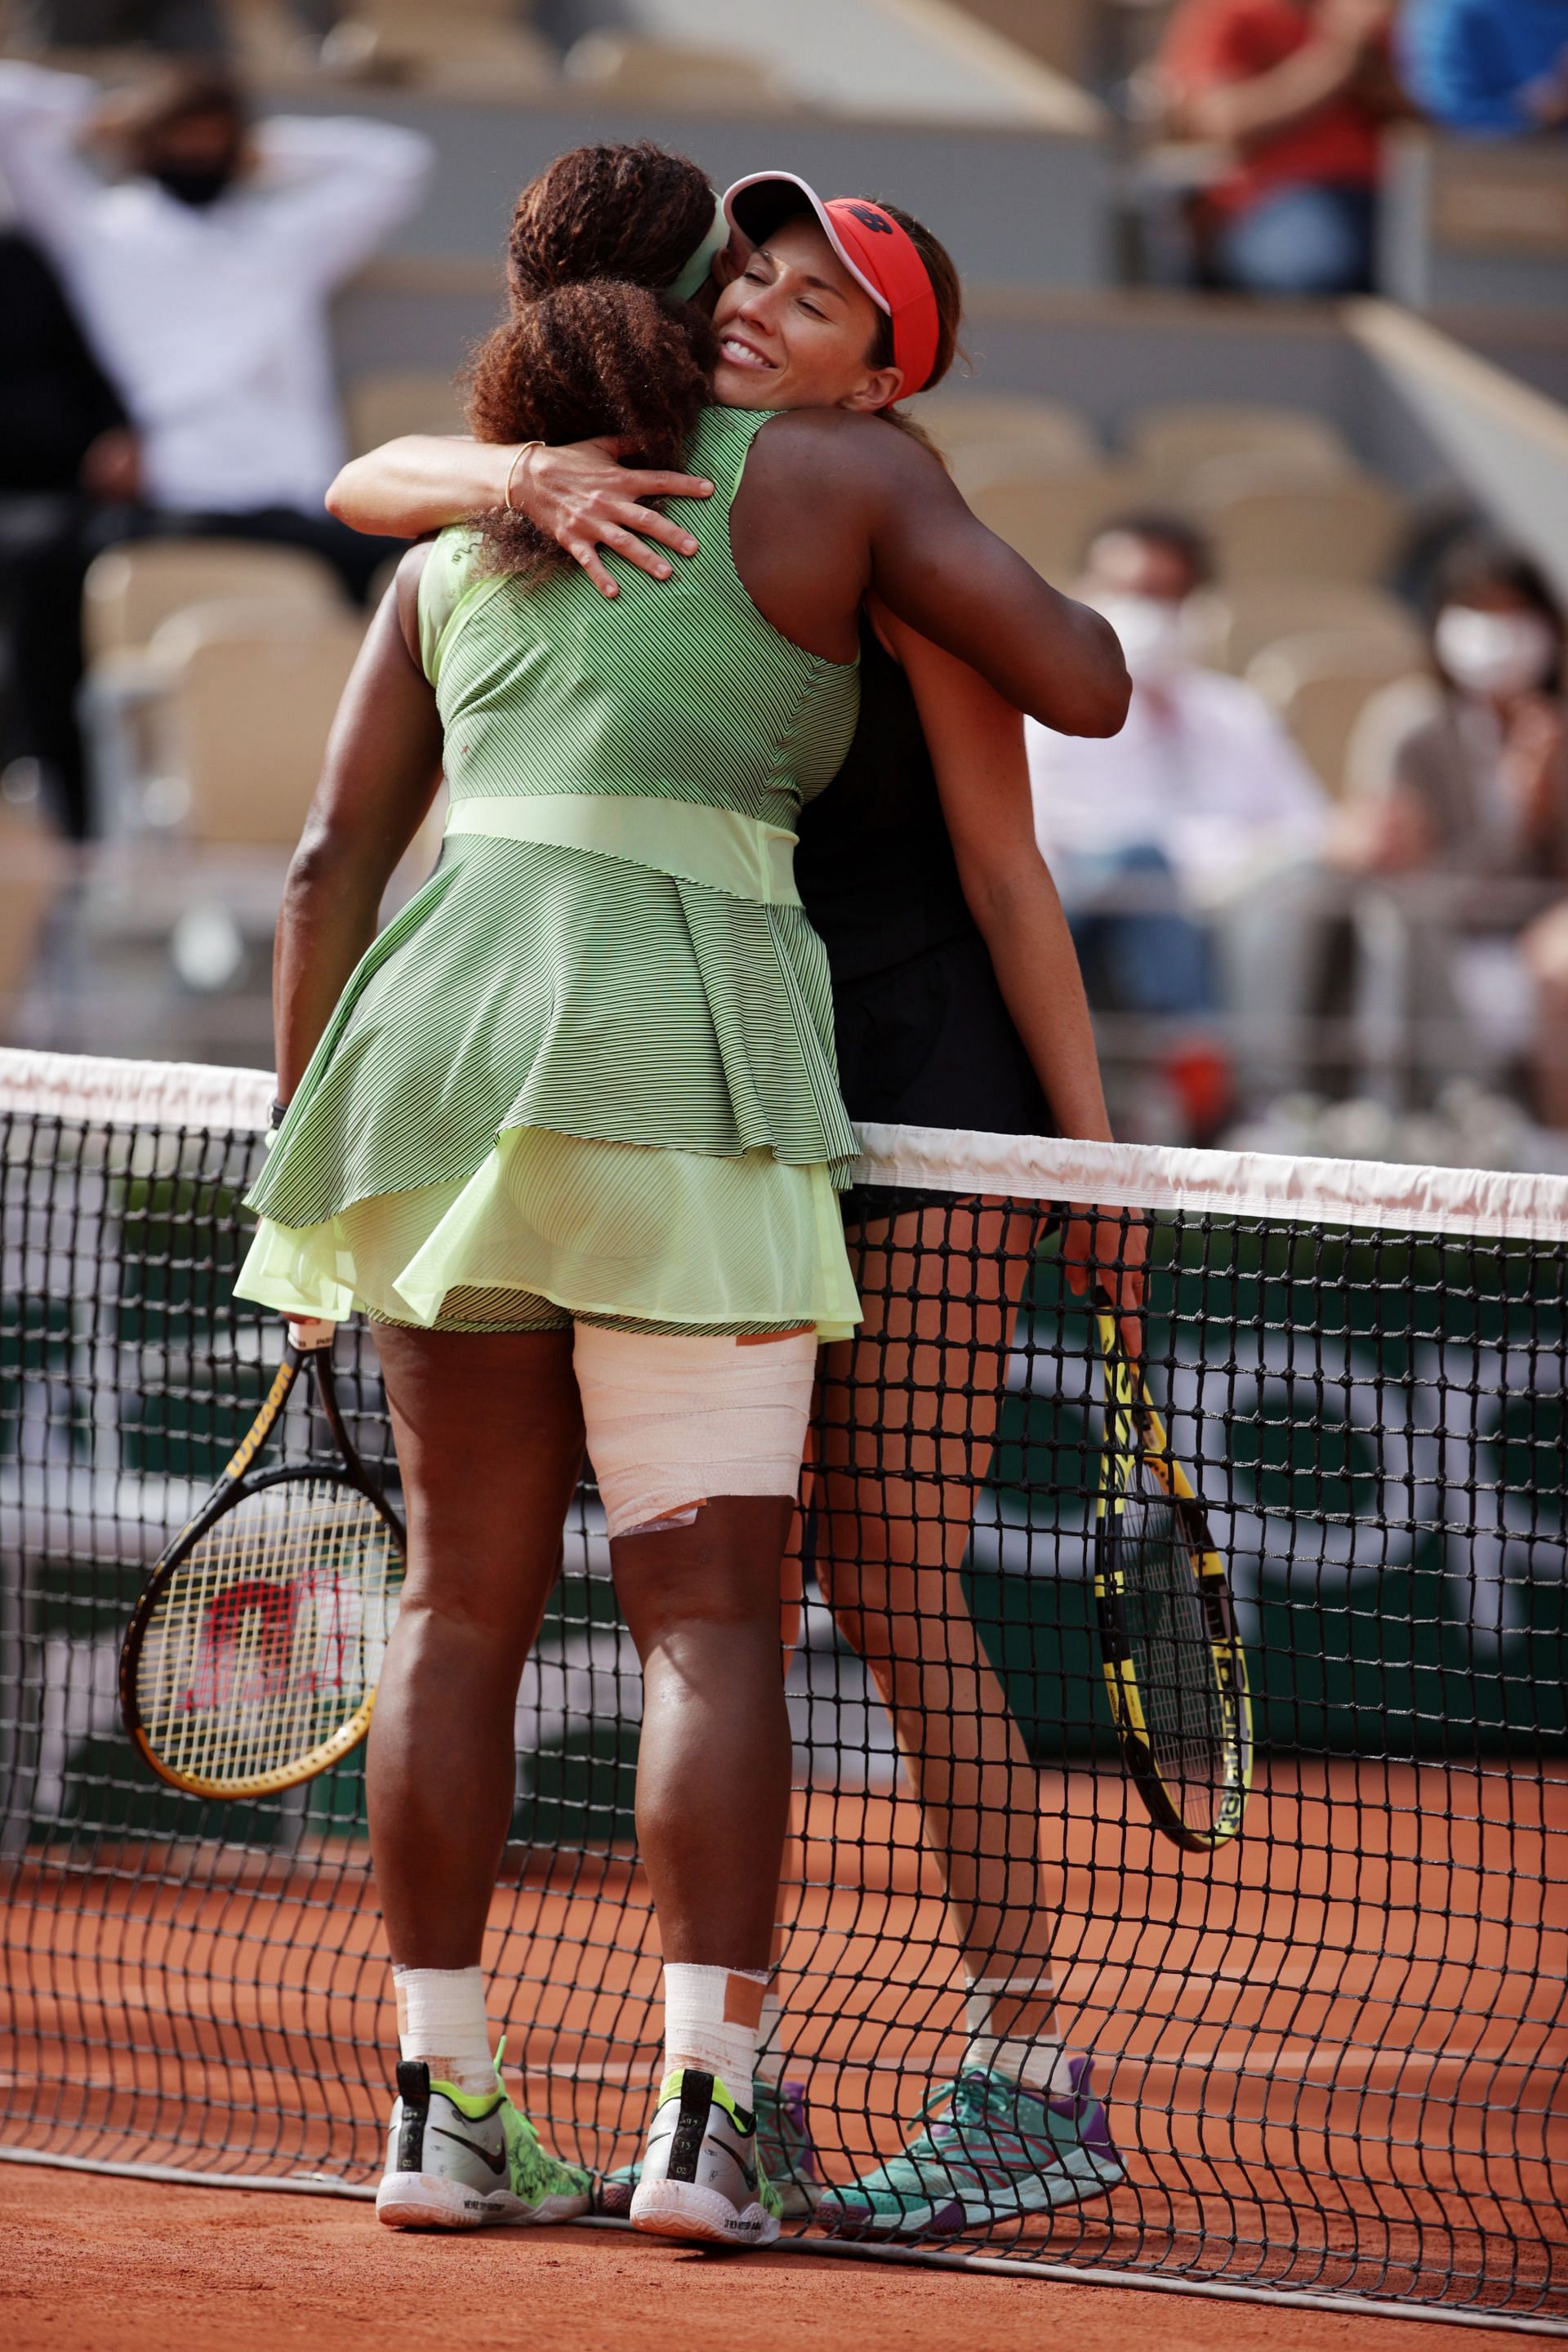 Serena Williams (L) &amp; Danielle Collins embrace after their third-round match at 2021 French Open